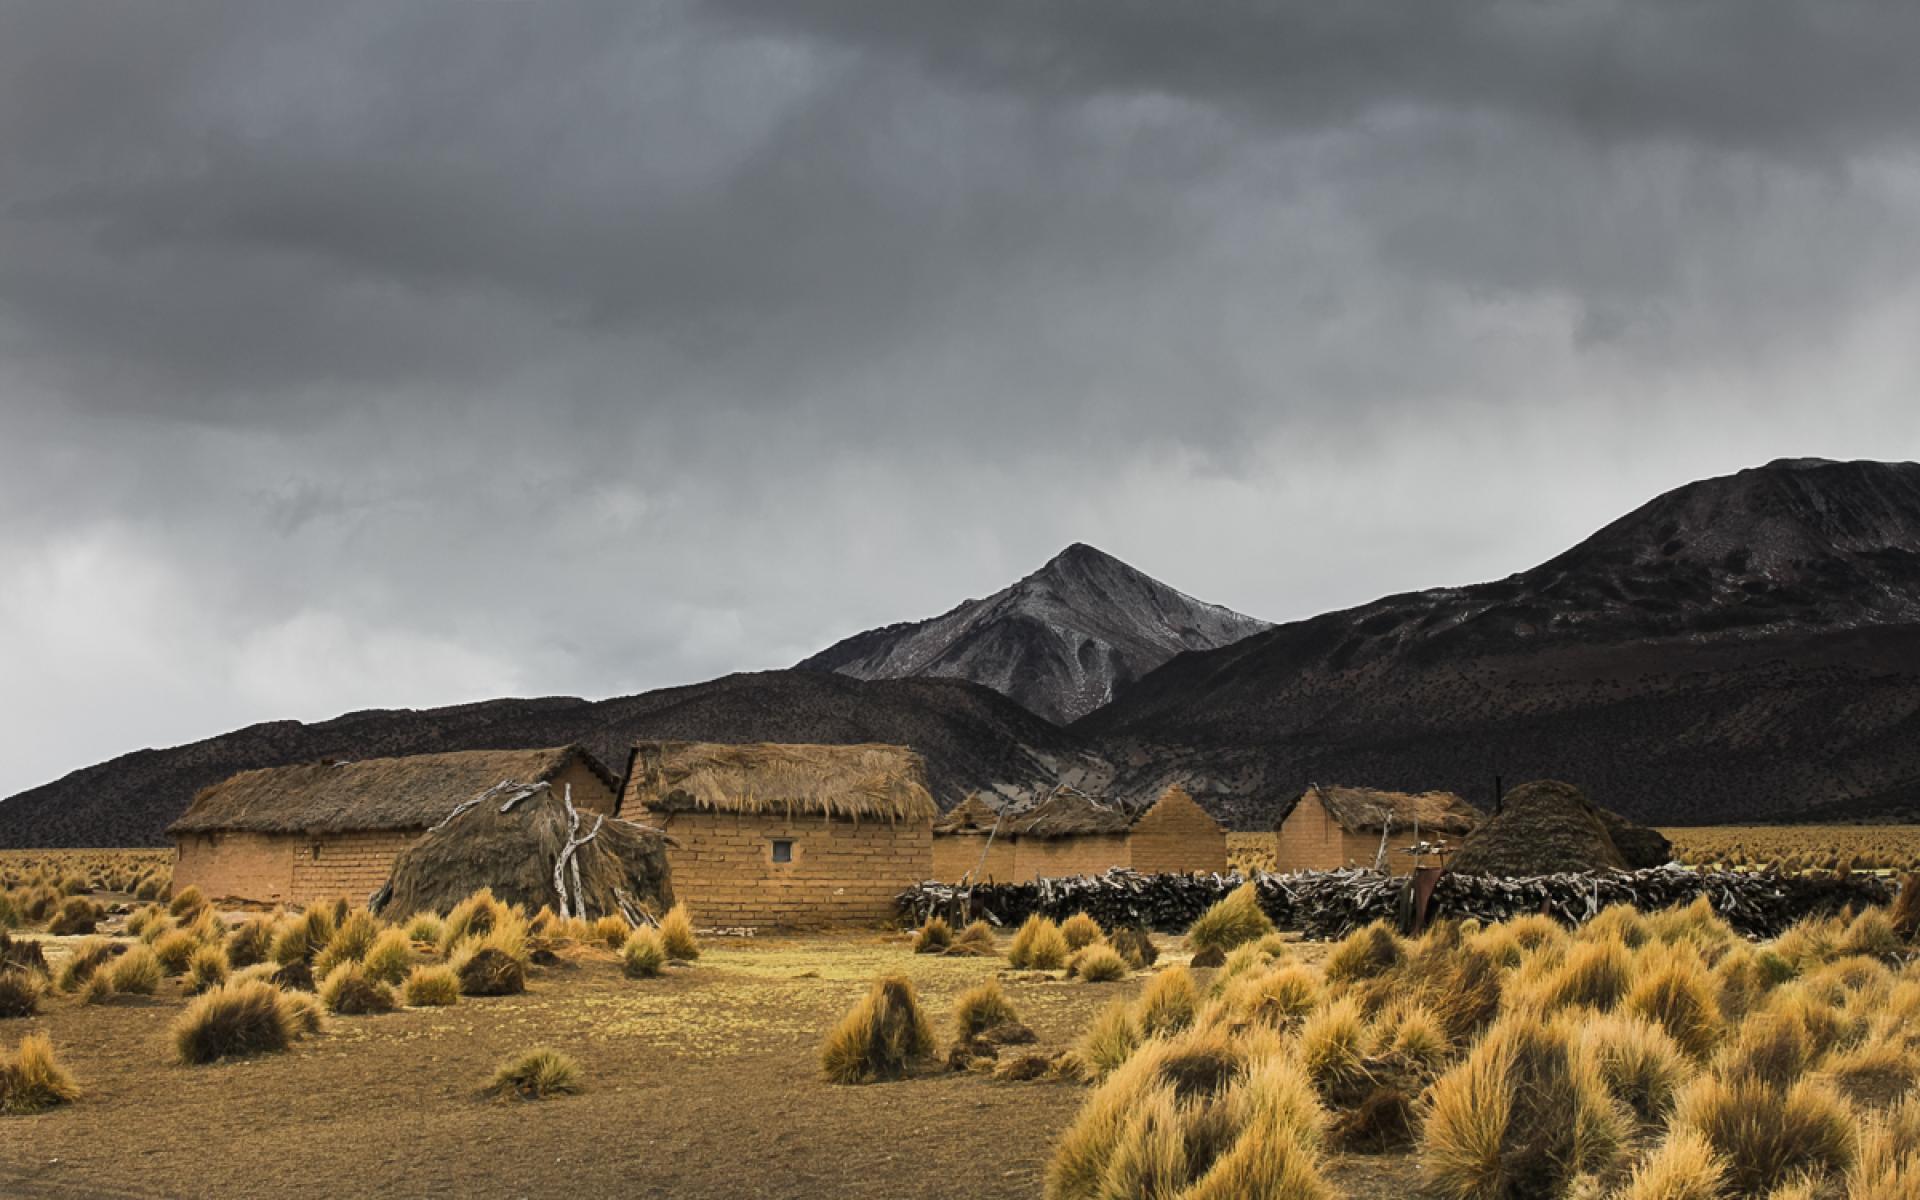 London Photography Awards Winner - A storm in andean life